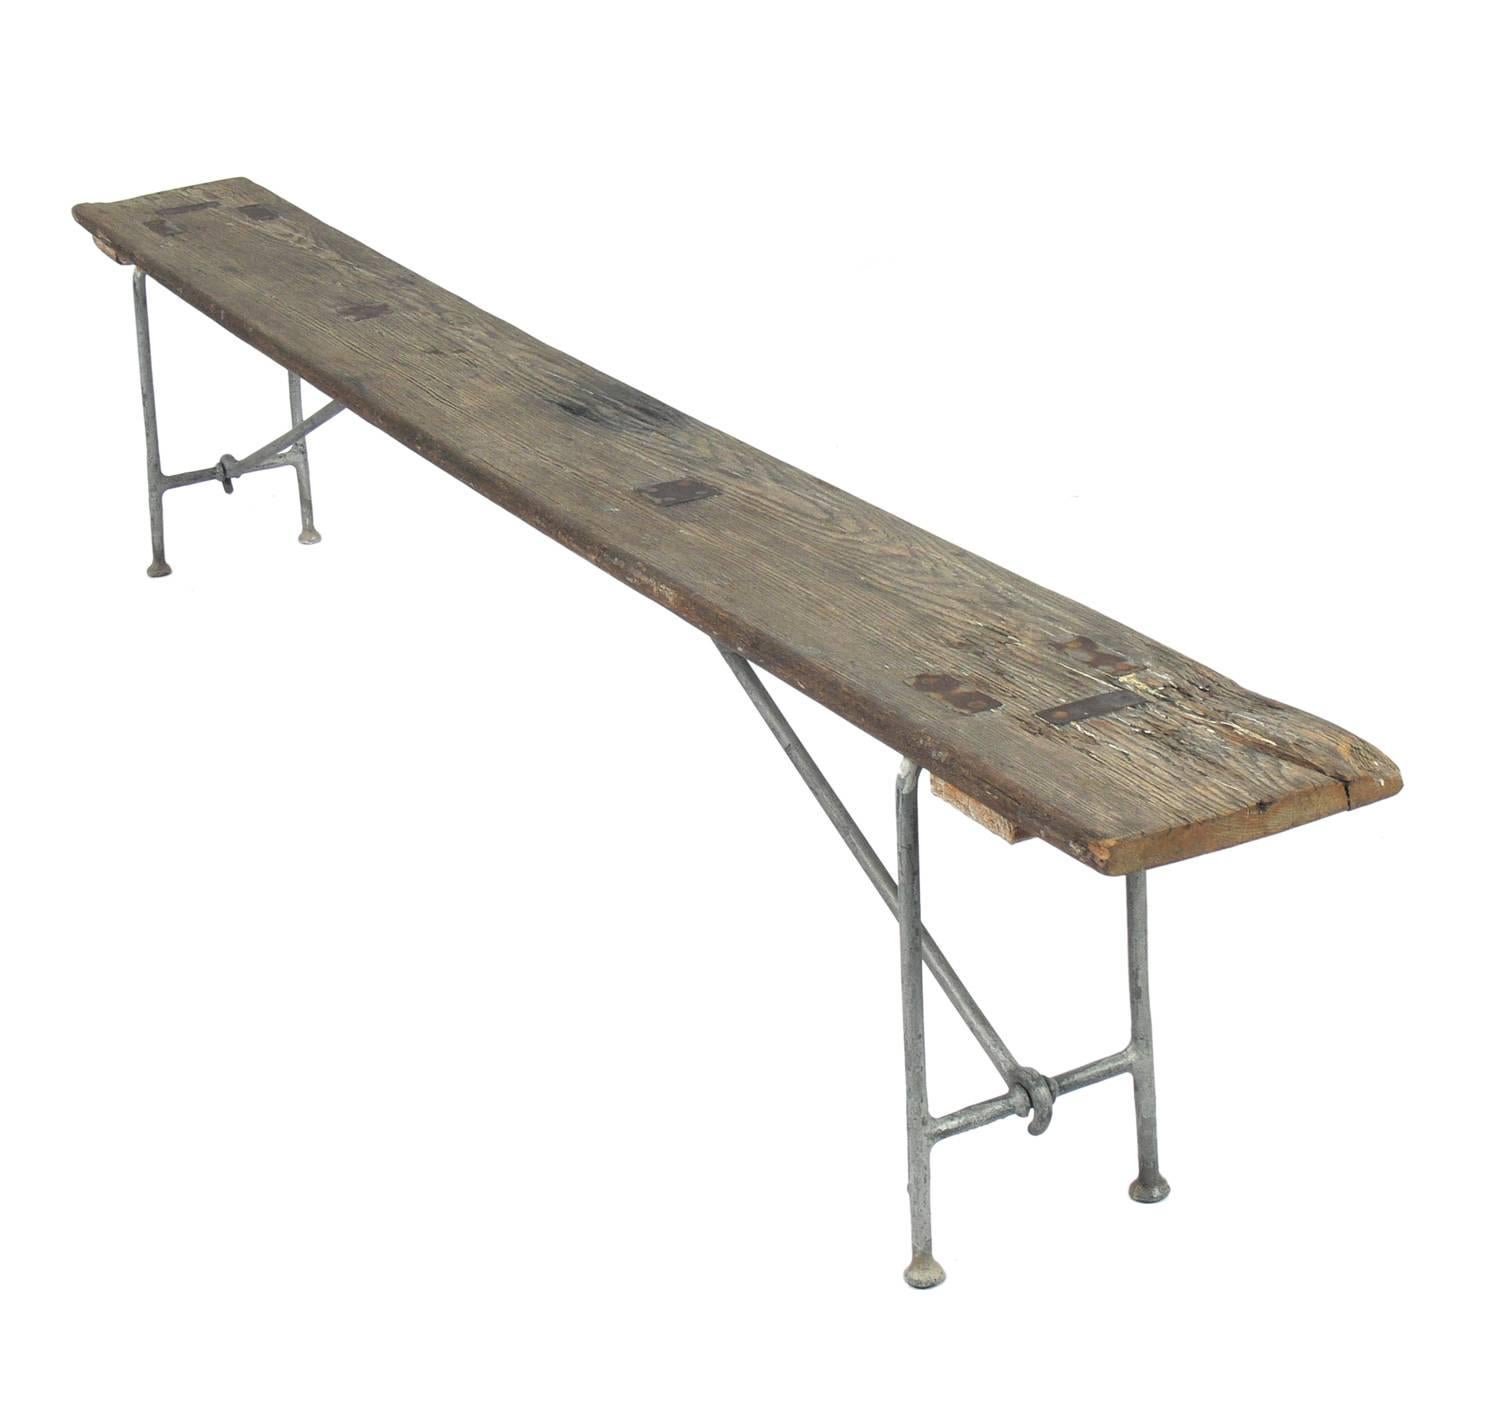 Nautical Campaign bench, American, circa 1930s. These benches were made for use on U.S. Navy ships in the 1930s. It is constructed of solid pine and galvanized metal. It easily folds down for flat storage. This example retains it's wonderful aged